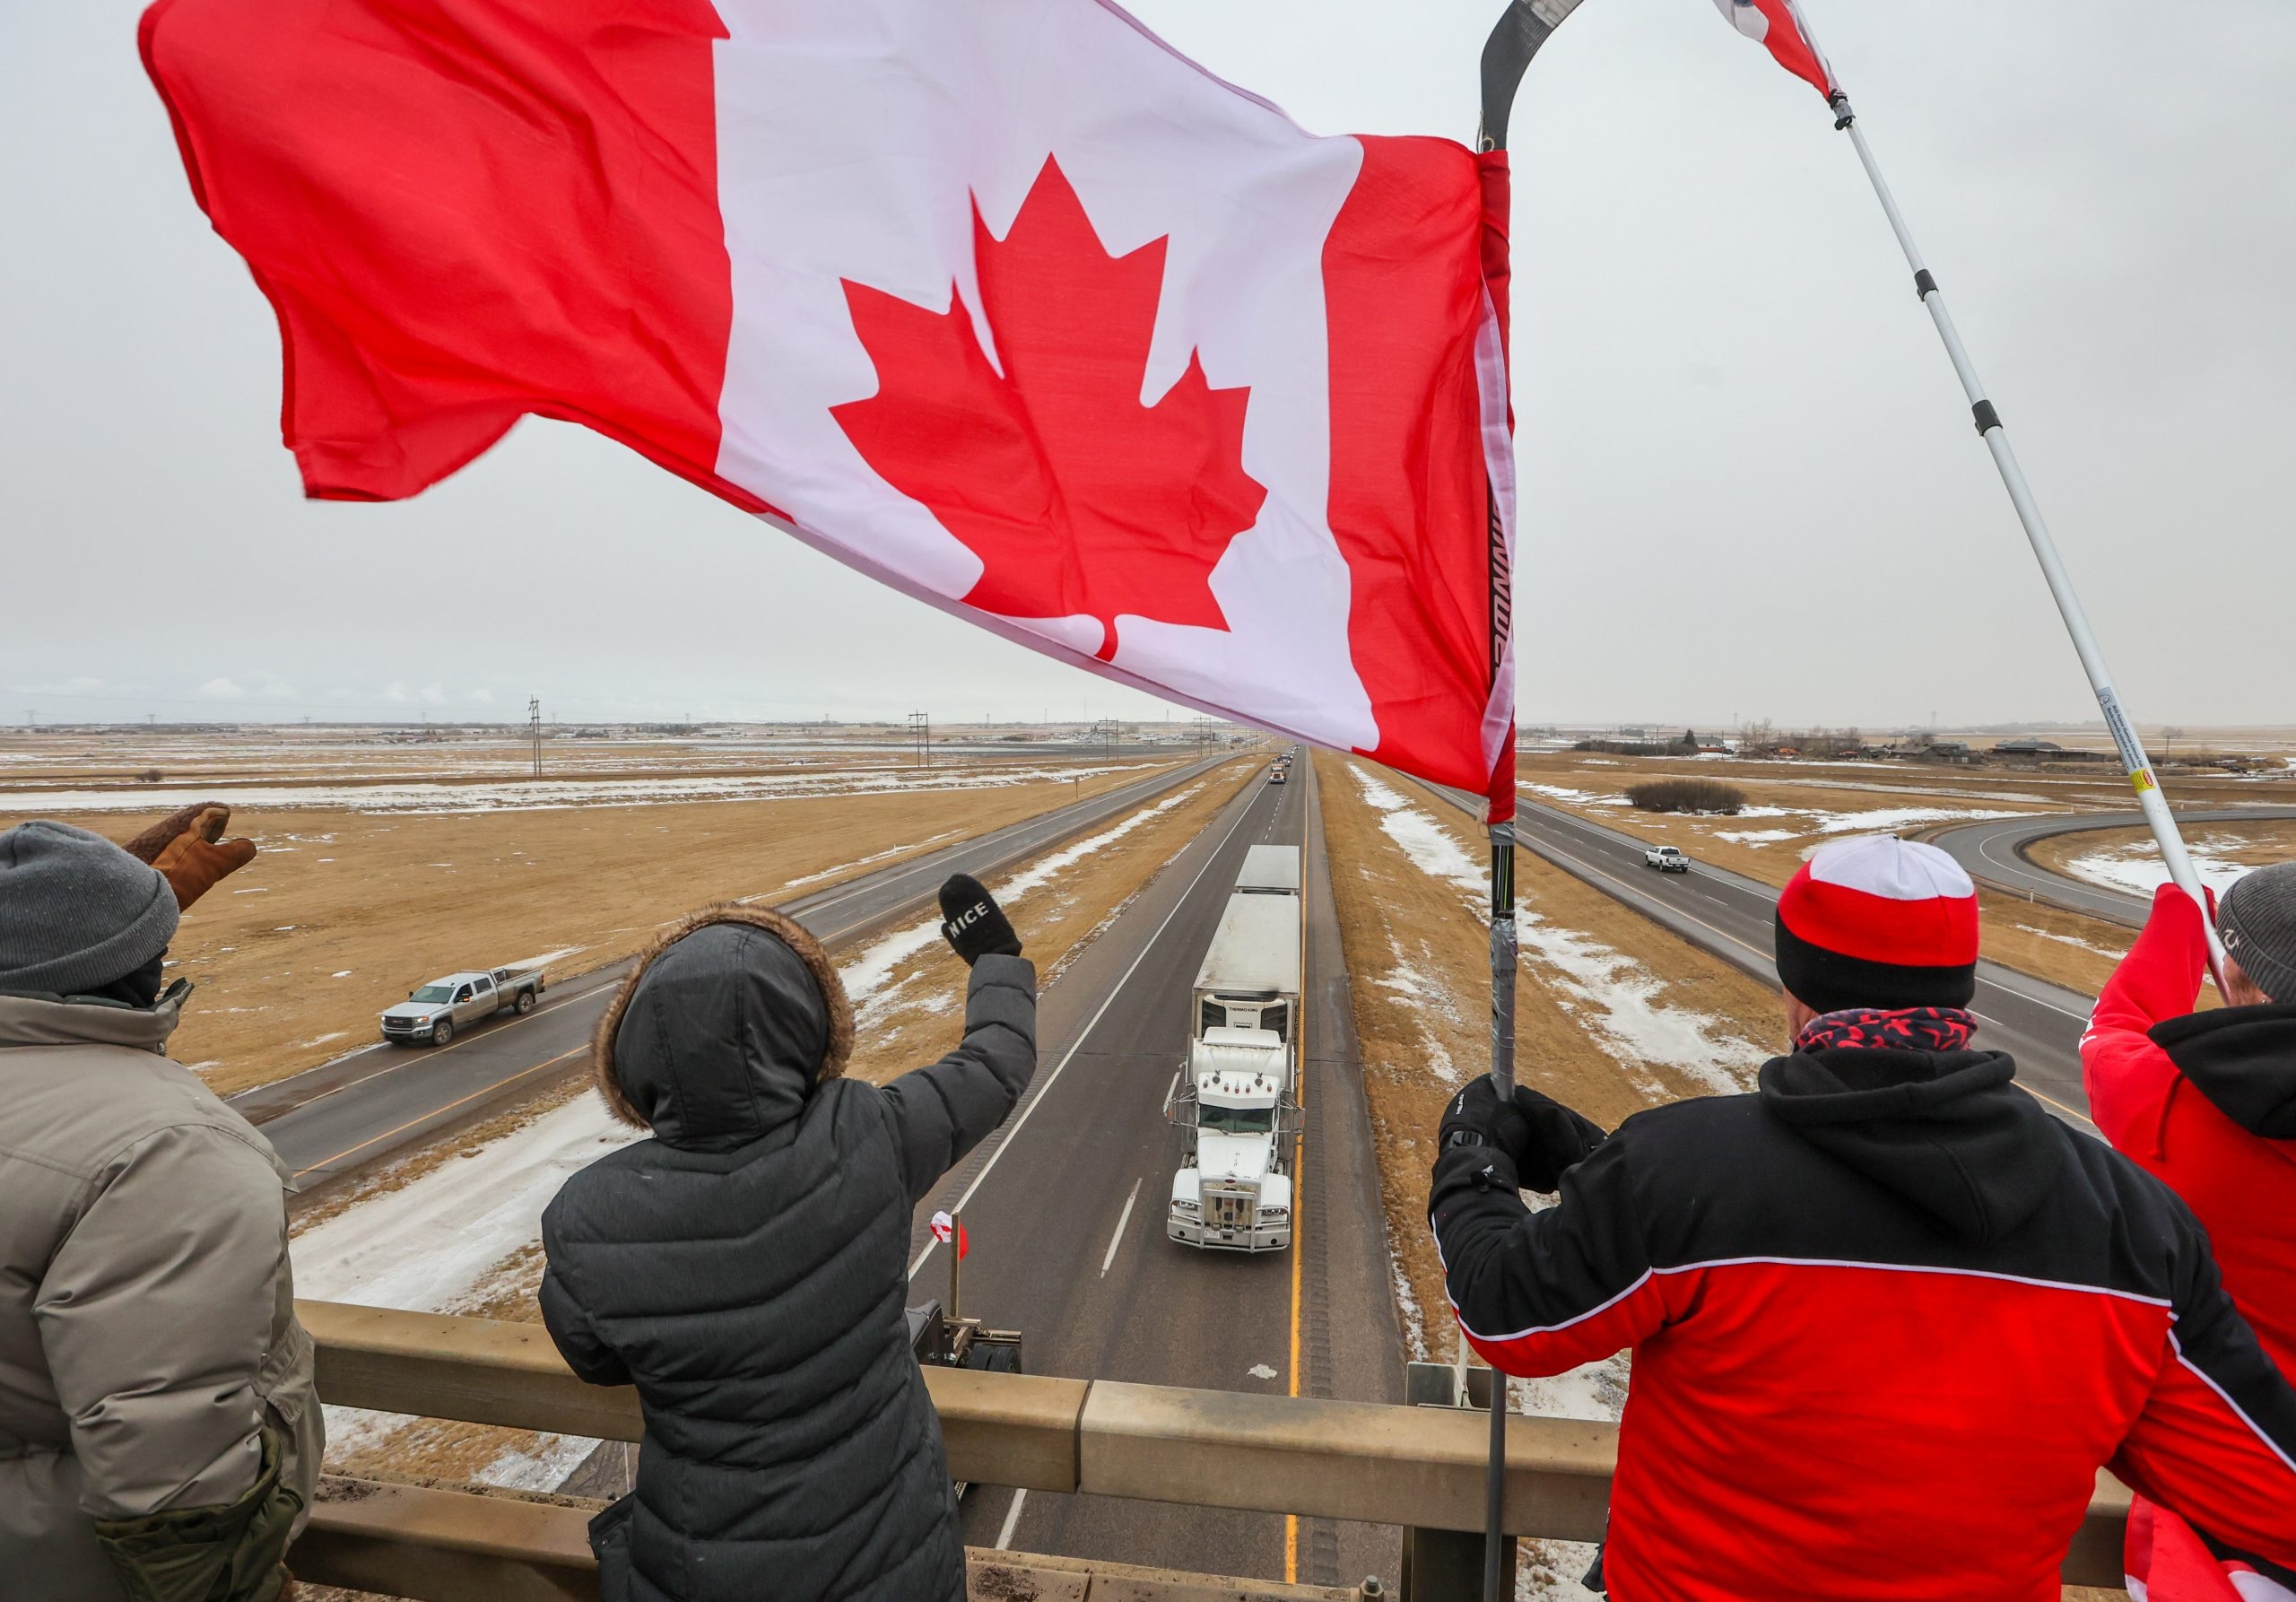 Supporters of the “freedom convoy” of truckers gather on an overpass over the Trans-Canada Highway east of Calgary on Monday, January 24, 2022.   